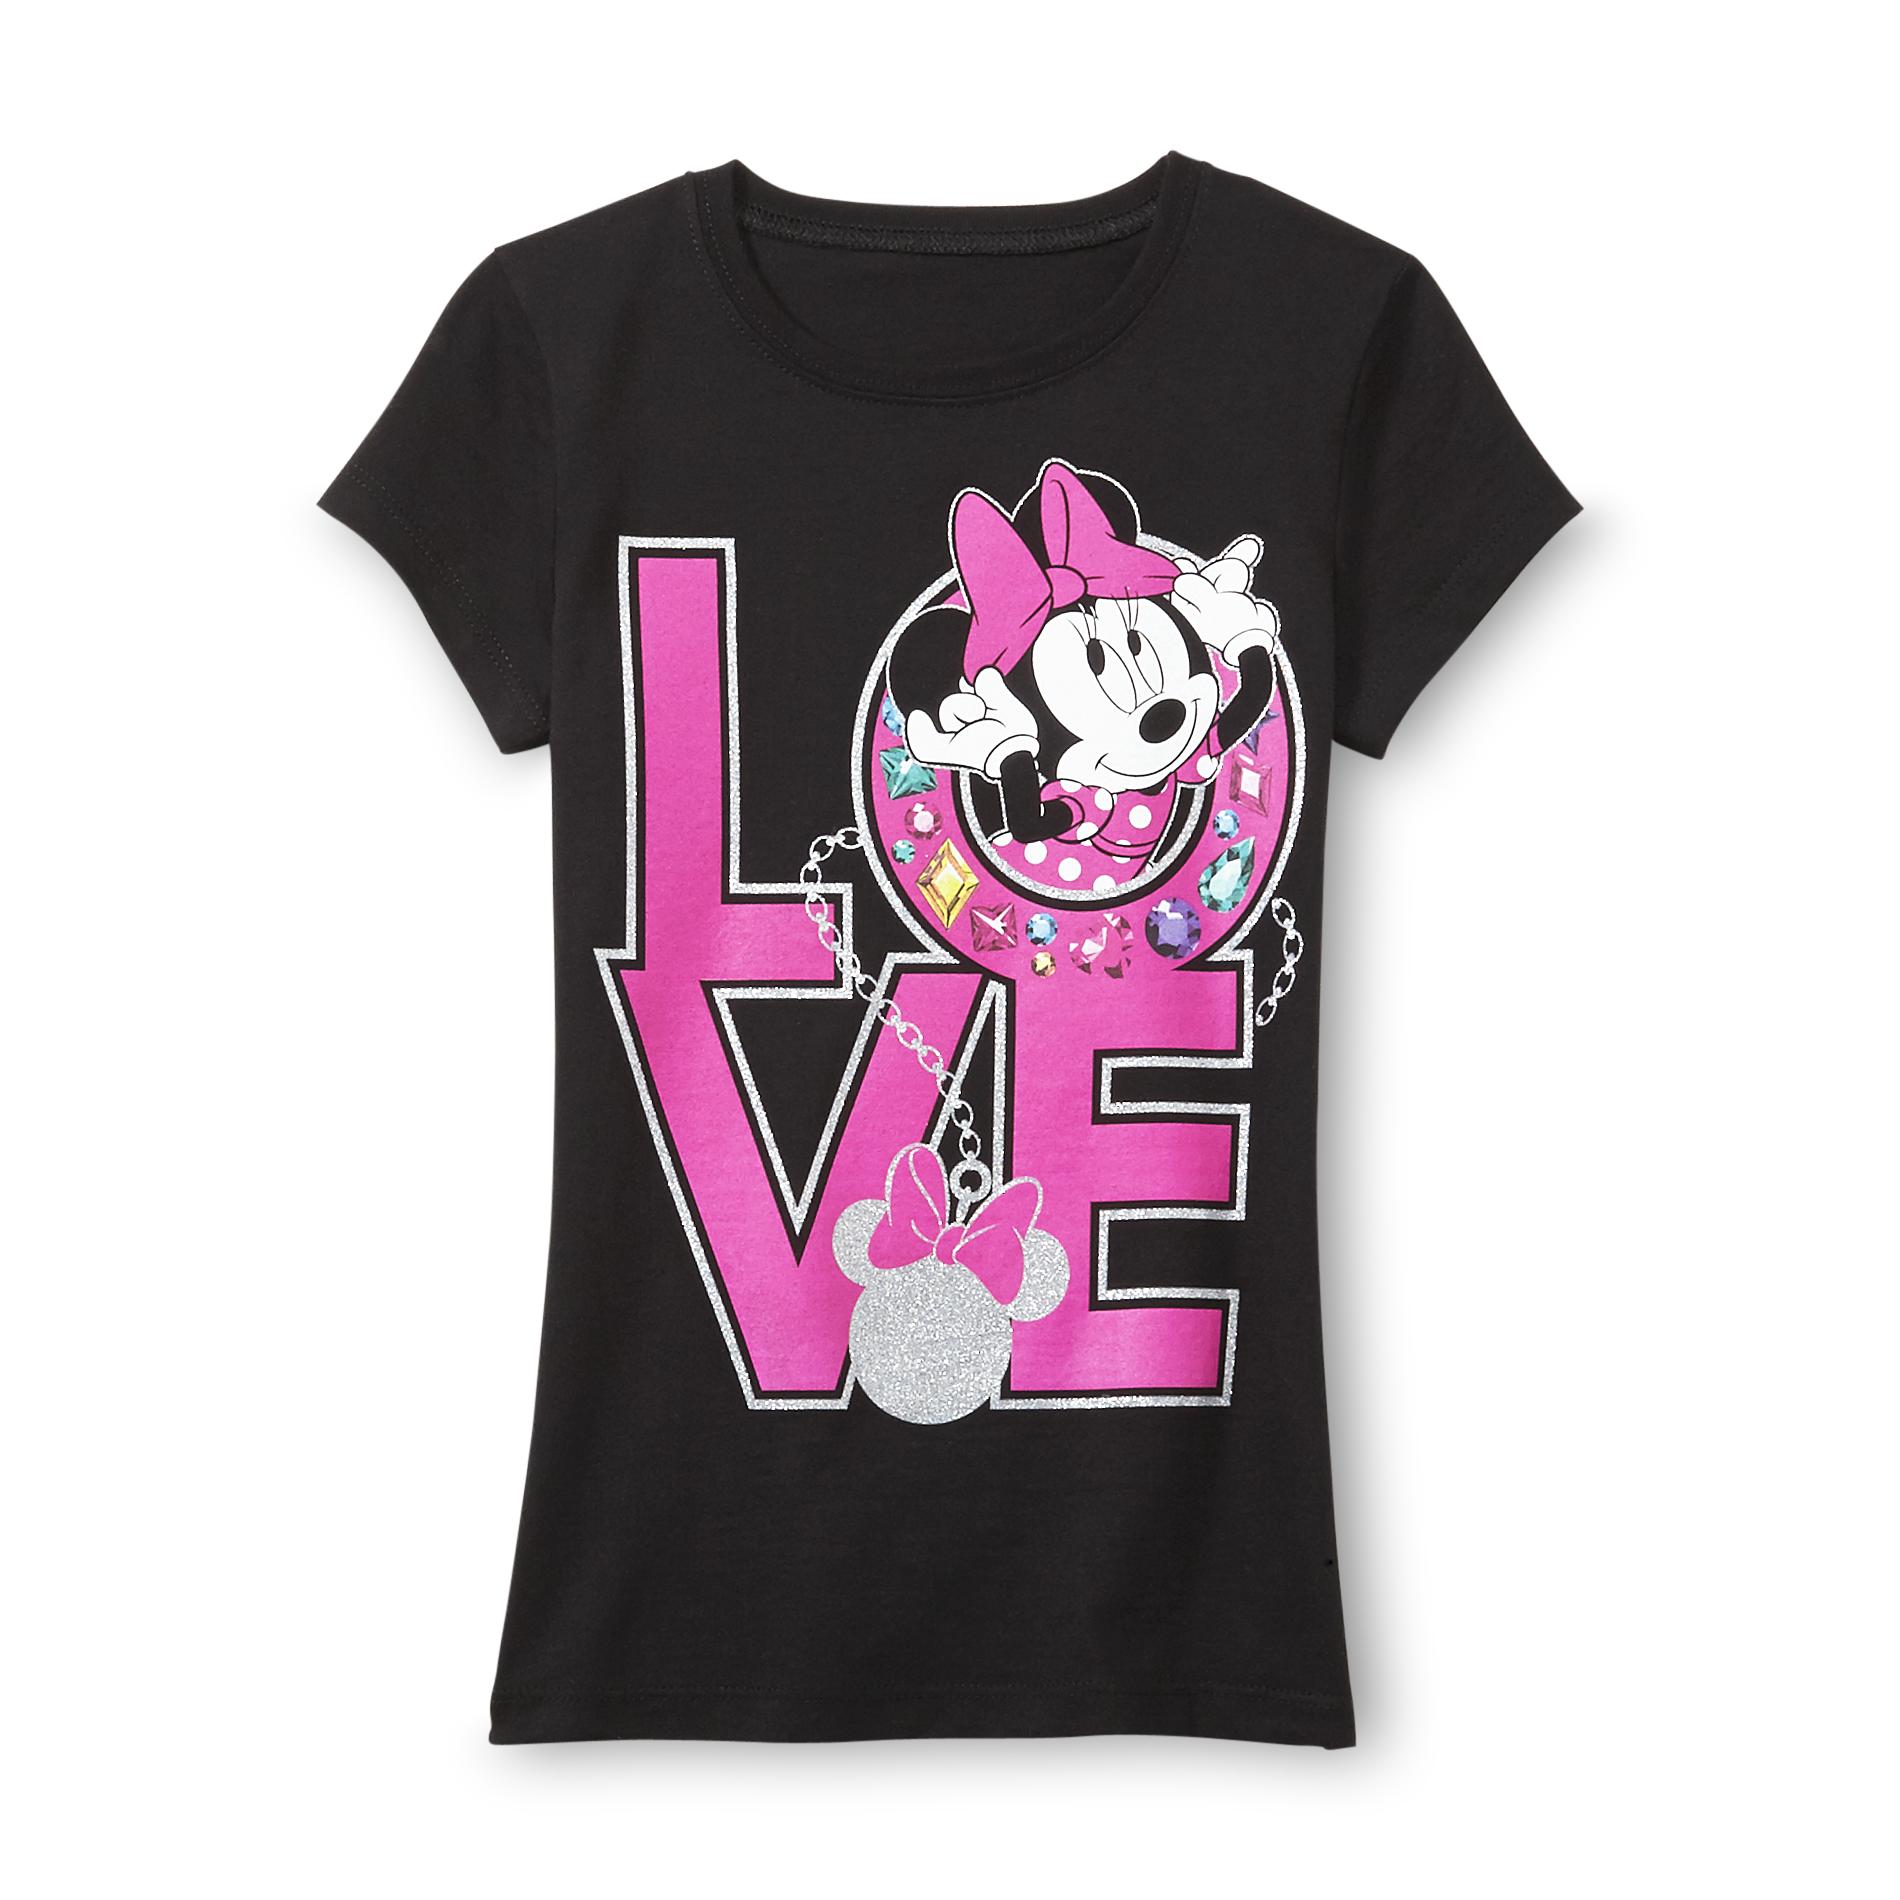 Disney Minnie Mouse Girl's Graphic T-Shirt - Love